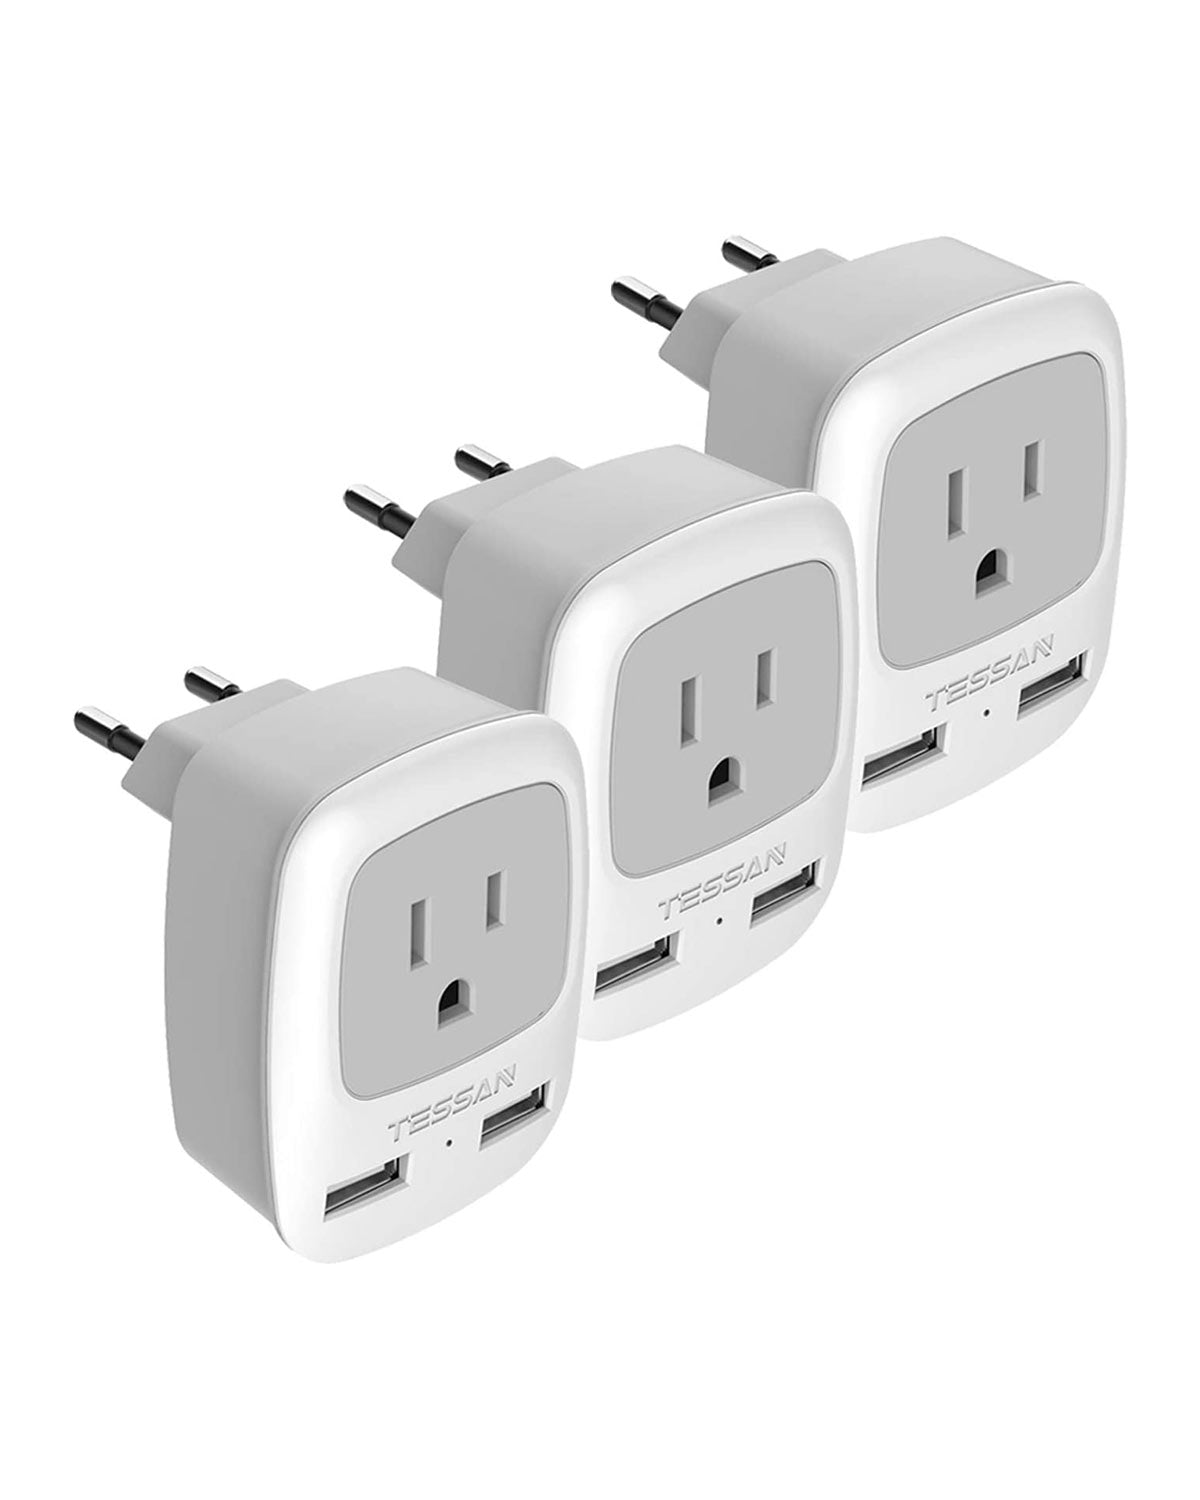 TESSAN International Power Outlet Adaptor with 2 USB, 2 Pack